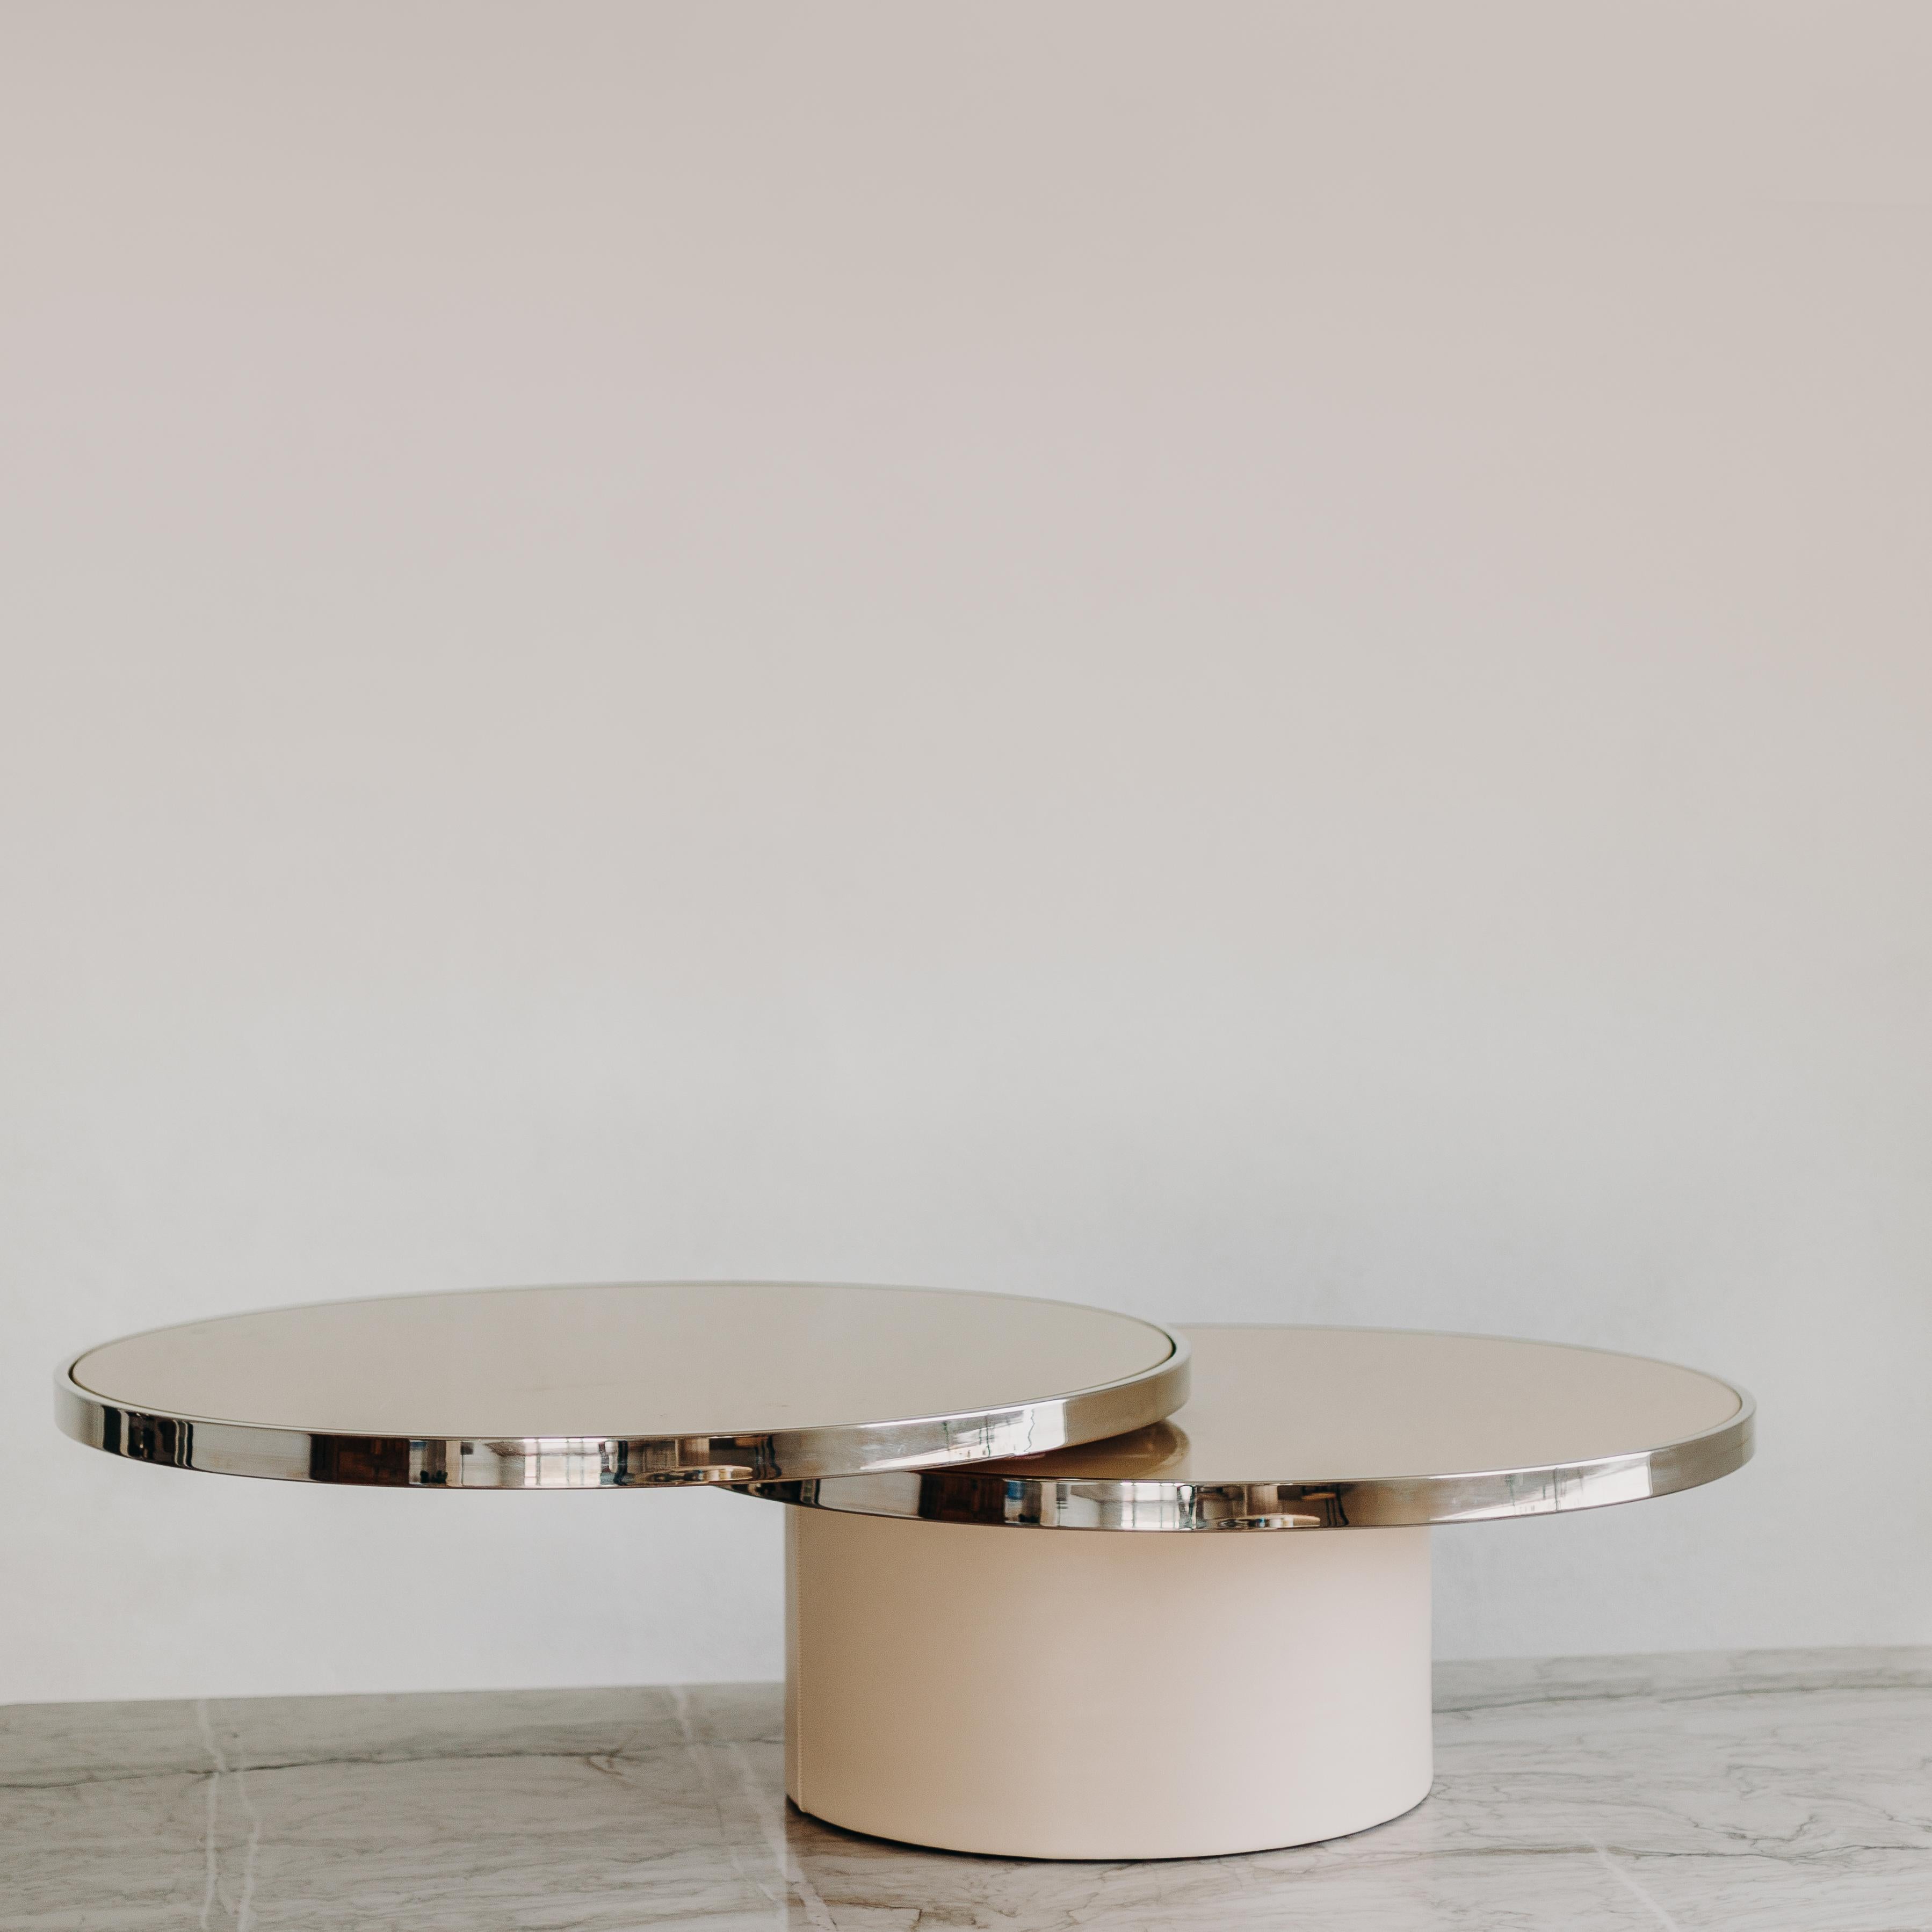 Stunning piece by the Design Institute of America. The two tier painted ivory glass tops revolve with ease. The chrome banding and suede covered drum base make for a timeless elegant piece that will suit a variety of decor styles.